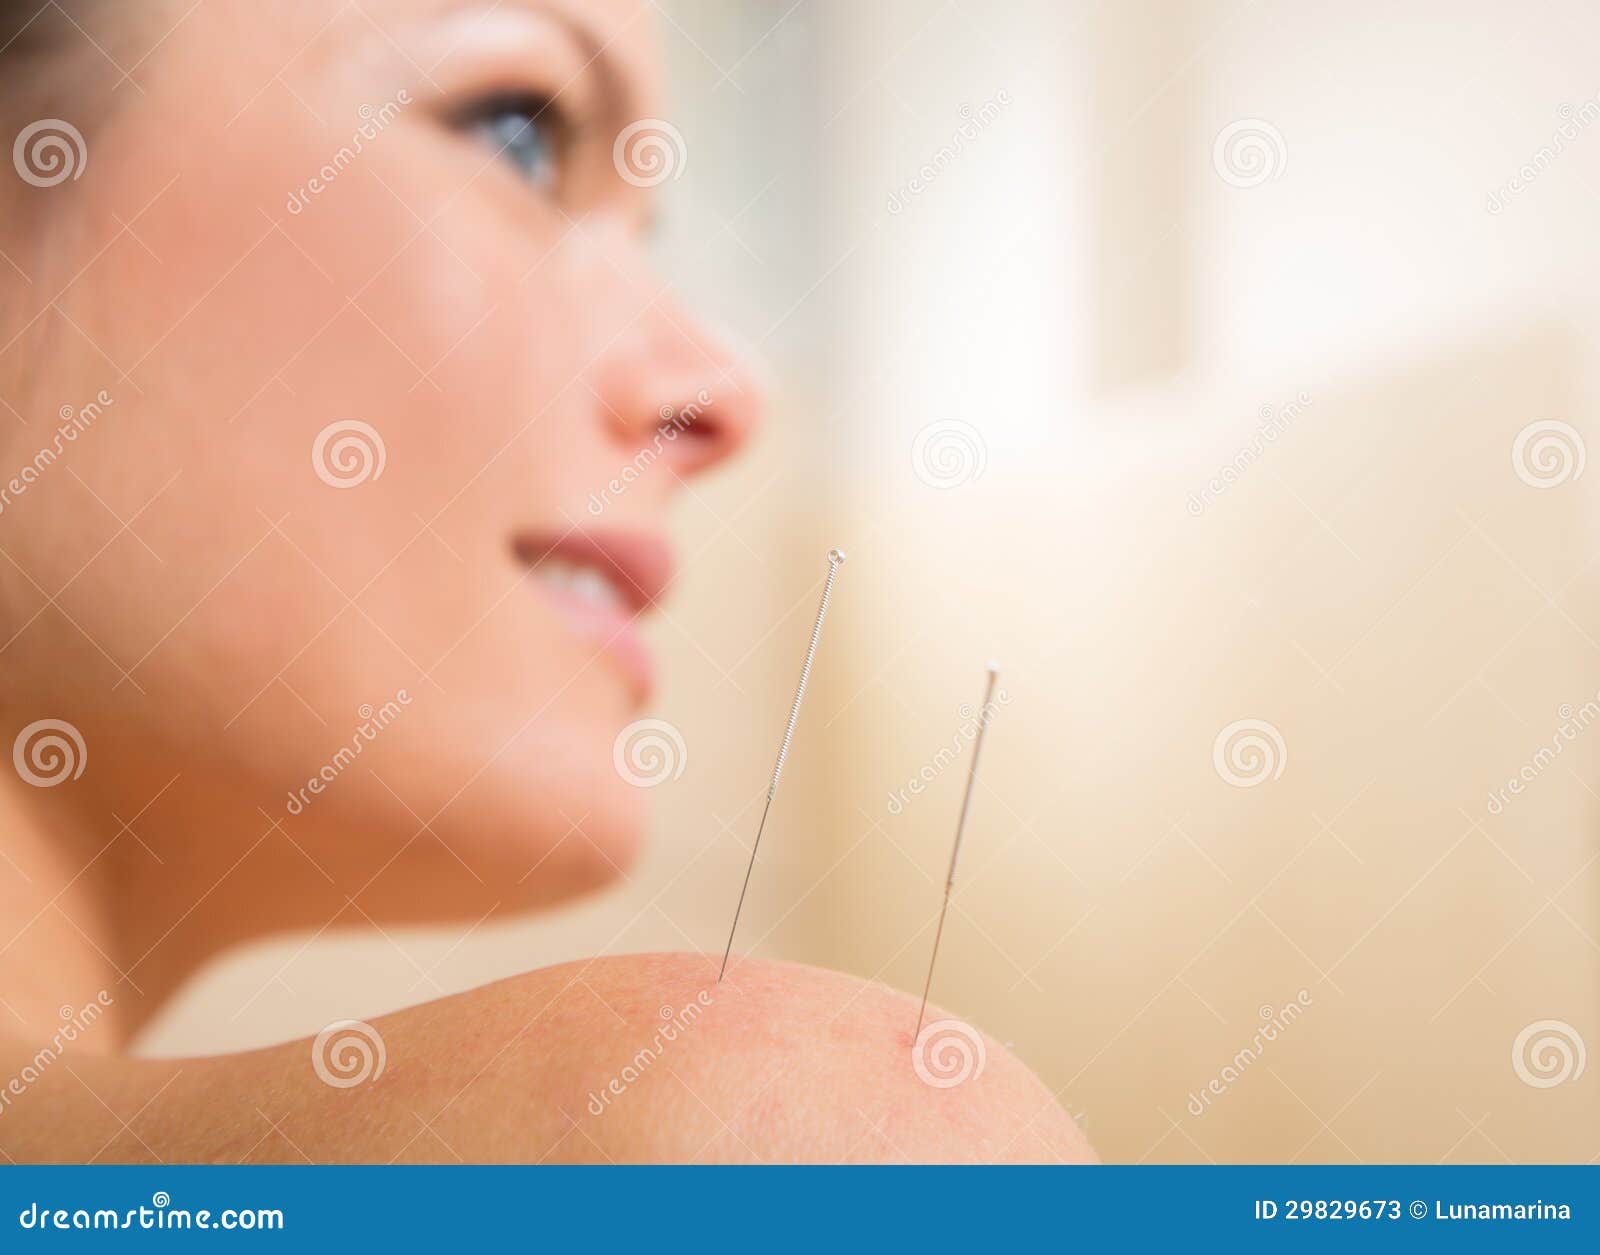 Acupuncture Needle Pricking on Woman Shoulder Stock Image - Image of